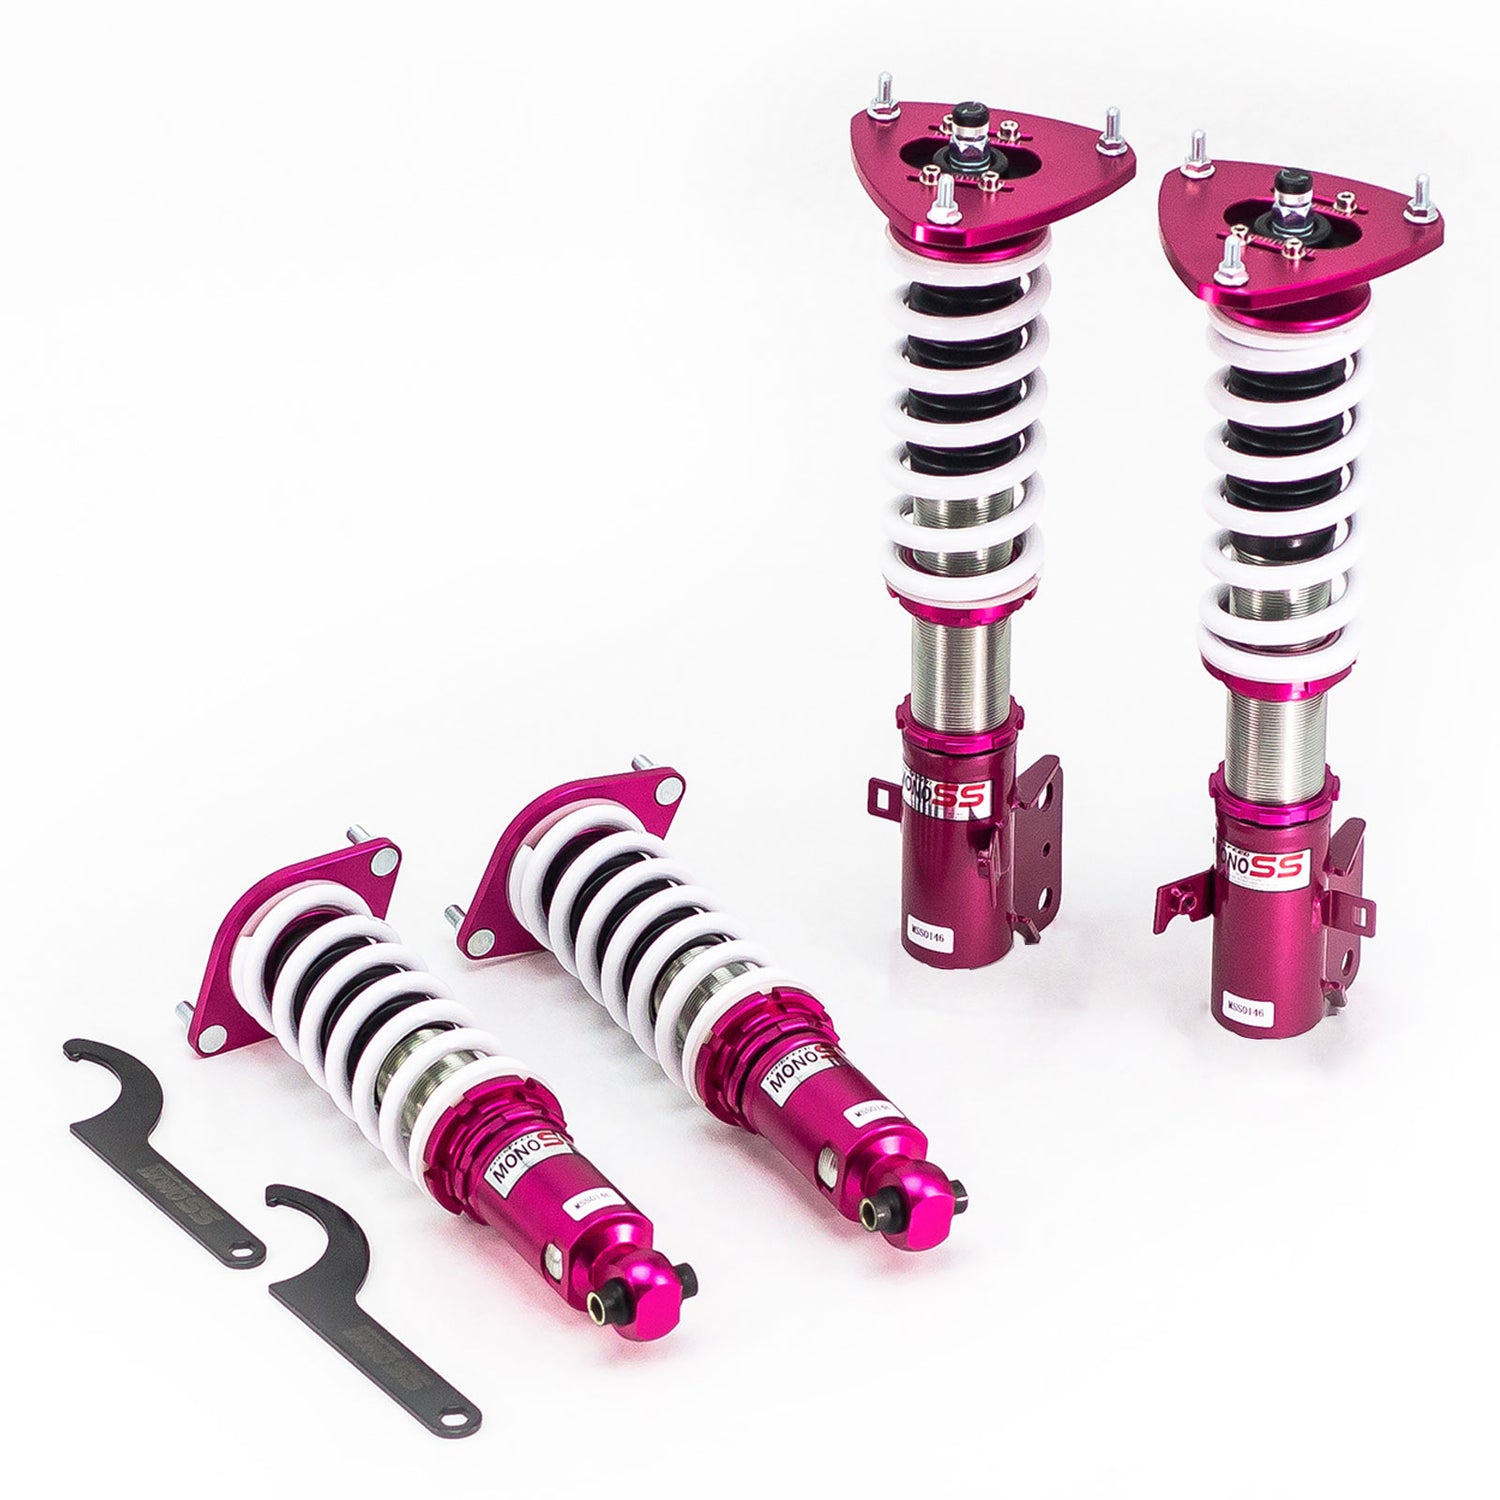 Godspeed MSS0146 MonoSS Coilover Lowering Kit, Fully Adjustable, Ride Height, Spring Tension And 16 Click Damping, Subaru Legacy(BM/BR) 2010-14